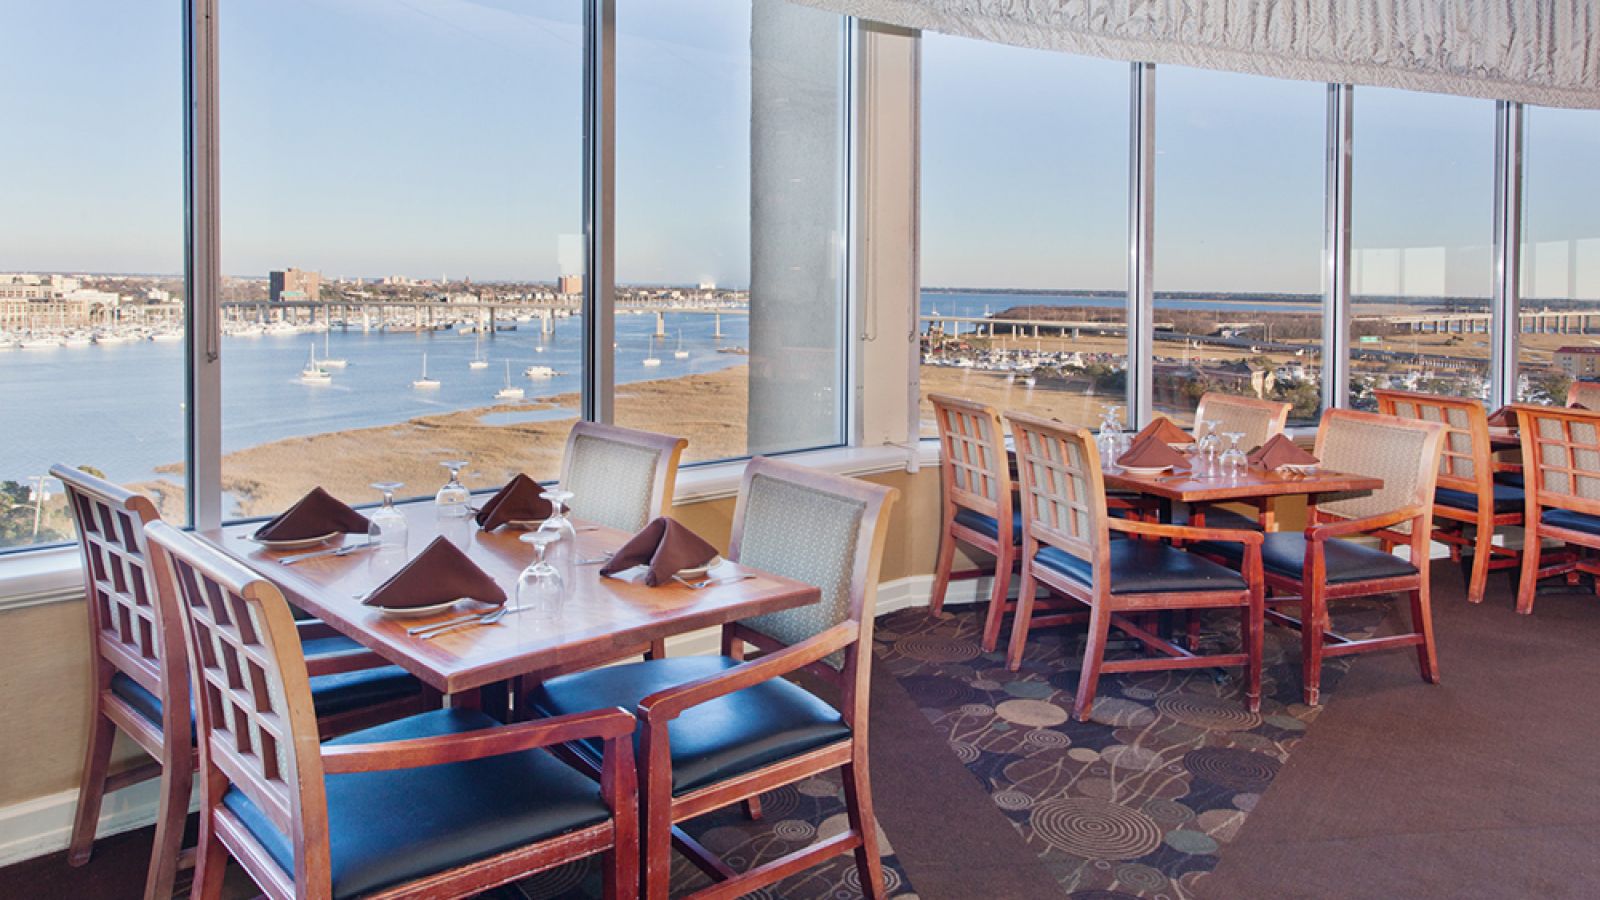 Holiday Inn Charleston Riverview - rooftop dining